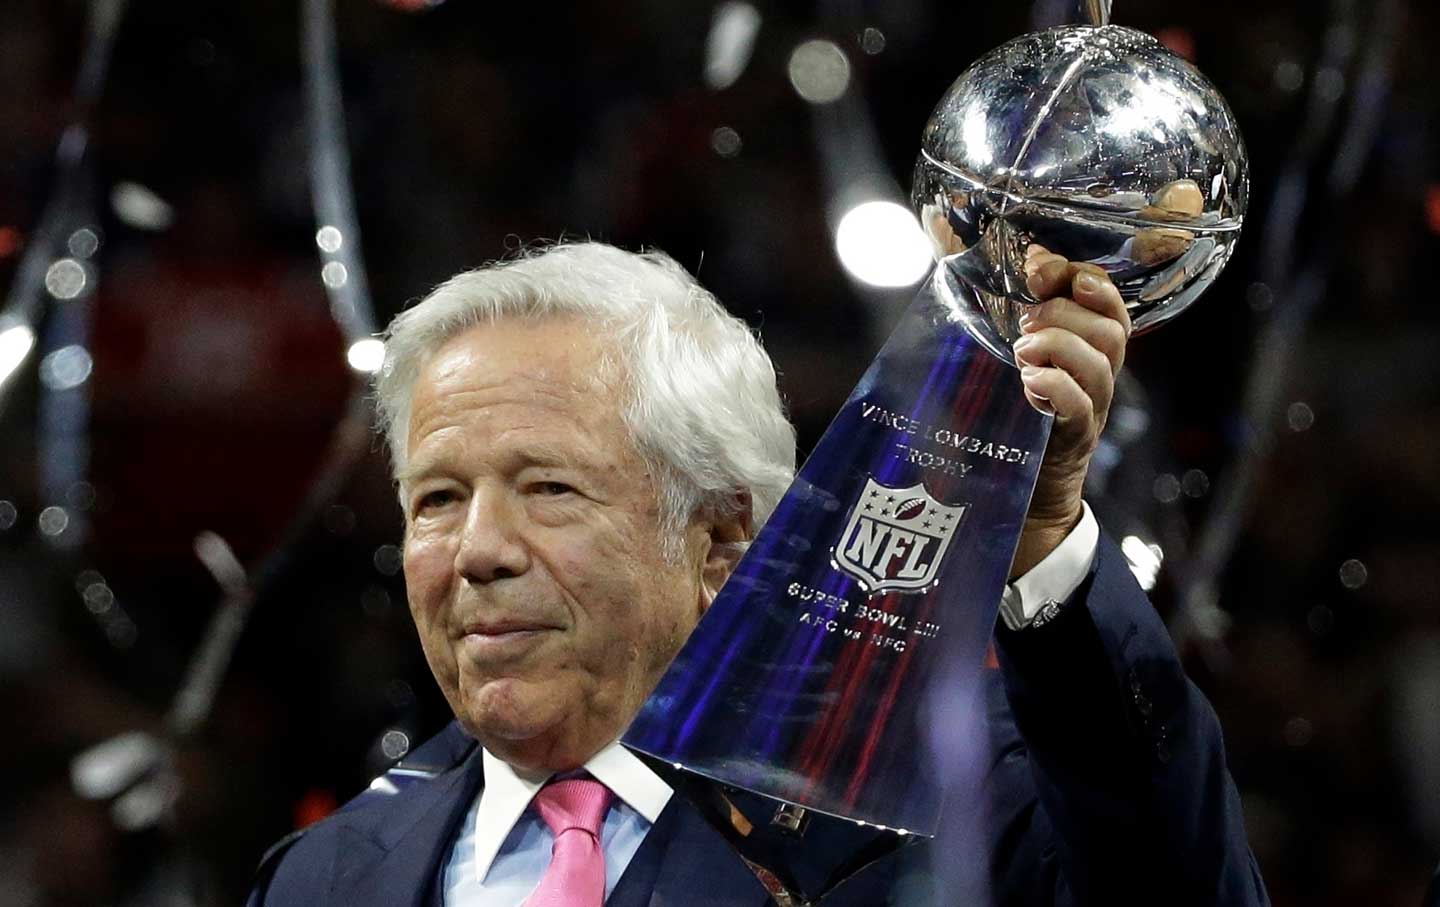 A Different Perspective on the NFL’s Robert Kraft